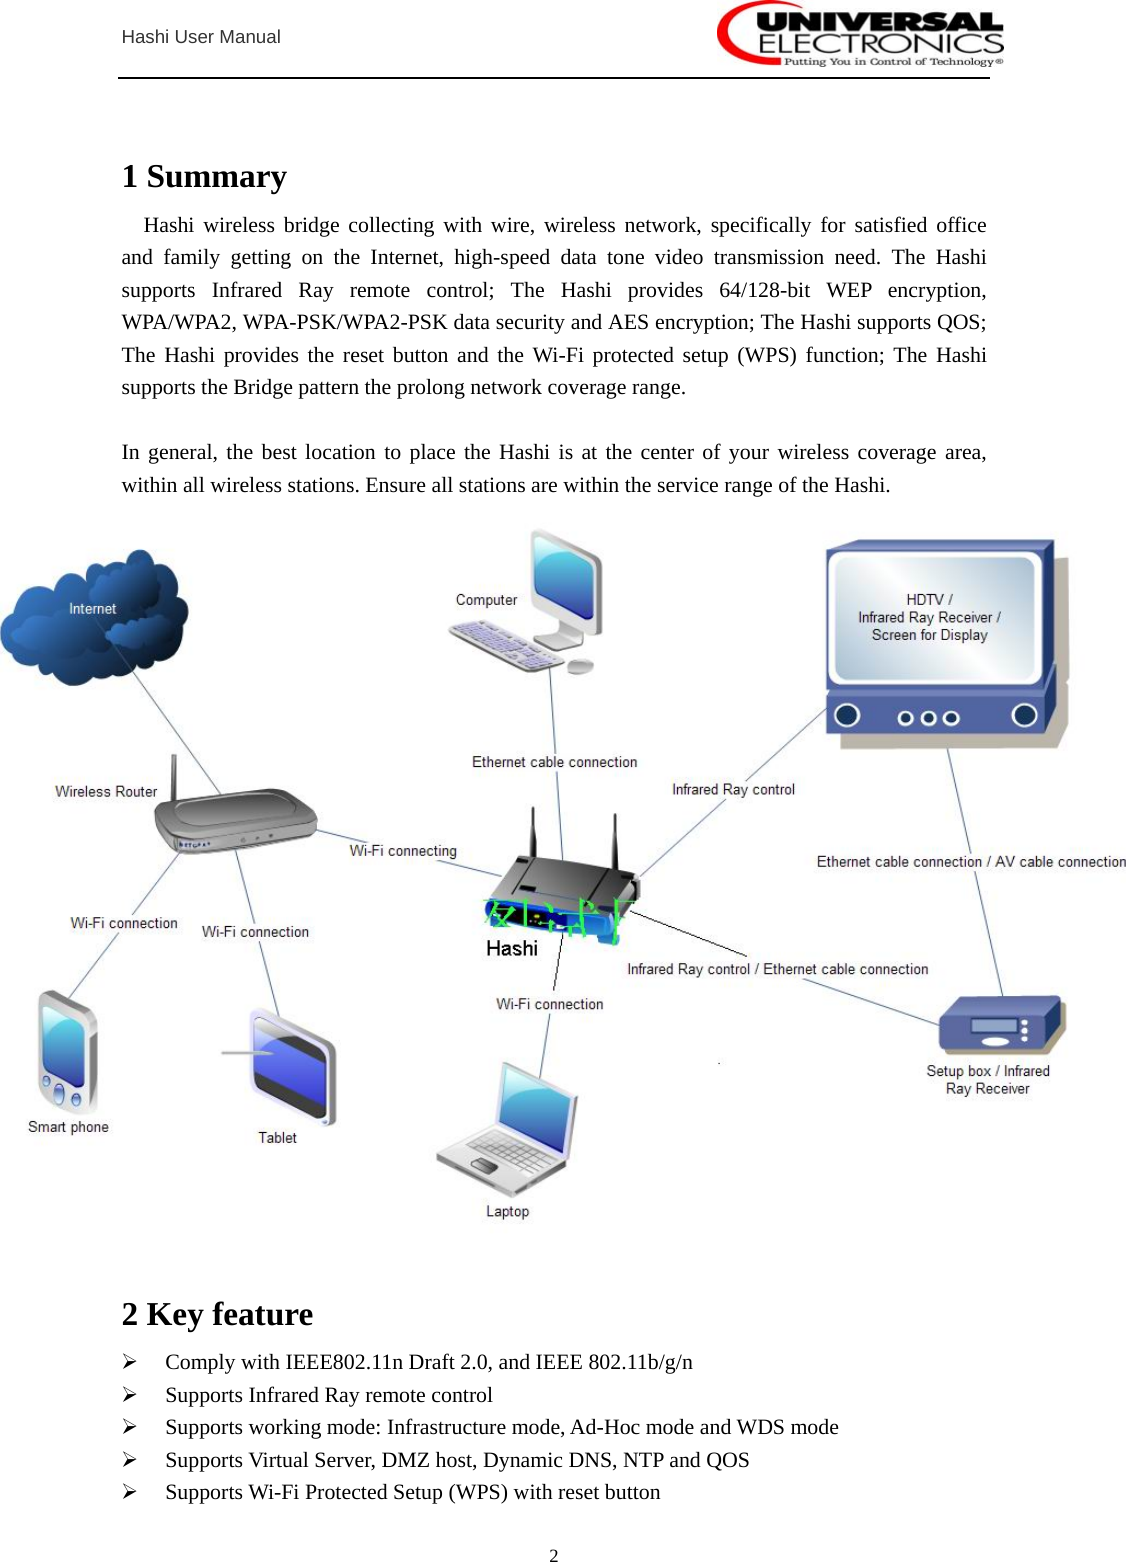  Hashi User Manual  2  1 Summary   Hashi wireless bridge collecting with wire, wireless network, specifically for satisfied office and family getting on the Internet, high-speed data tone video transmission need. The Hashi supports Infrared Ray remote control; The Hashi provides 64/128-bit WEP encryption, WPA/WPA2, WPA-PSK/WPA2-PSK data security and AES encryption; The Hashi supports QOS; The Hashi provides the reset button and the Wi-Fi protected setup (WPS) function; The Hashi supports the Bridge pattern the prolong network coverage range.  In general, the best location to place the Hashi is at the center of your wireless coverage area, within all wireless stations. Ensure all stations are within the service range of the Hashi.   2 Key feature ¾ Comply with IEEE802.11n Draft 2.0, and IEEE 802.11b/g/n ¾ Supports Infrared Ray remote control ¾ Supports working mode: Infrastructure mode, Ad-Hoc mode and WDS mode ¾ Supports Virtual Server, DMZ host, Dynamic DNS, NTP and QOS ¾ Supports Wi-Fi Protected Setup (WPS) with reset button 